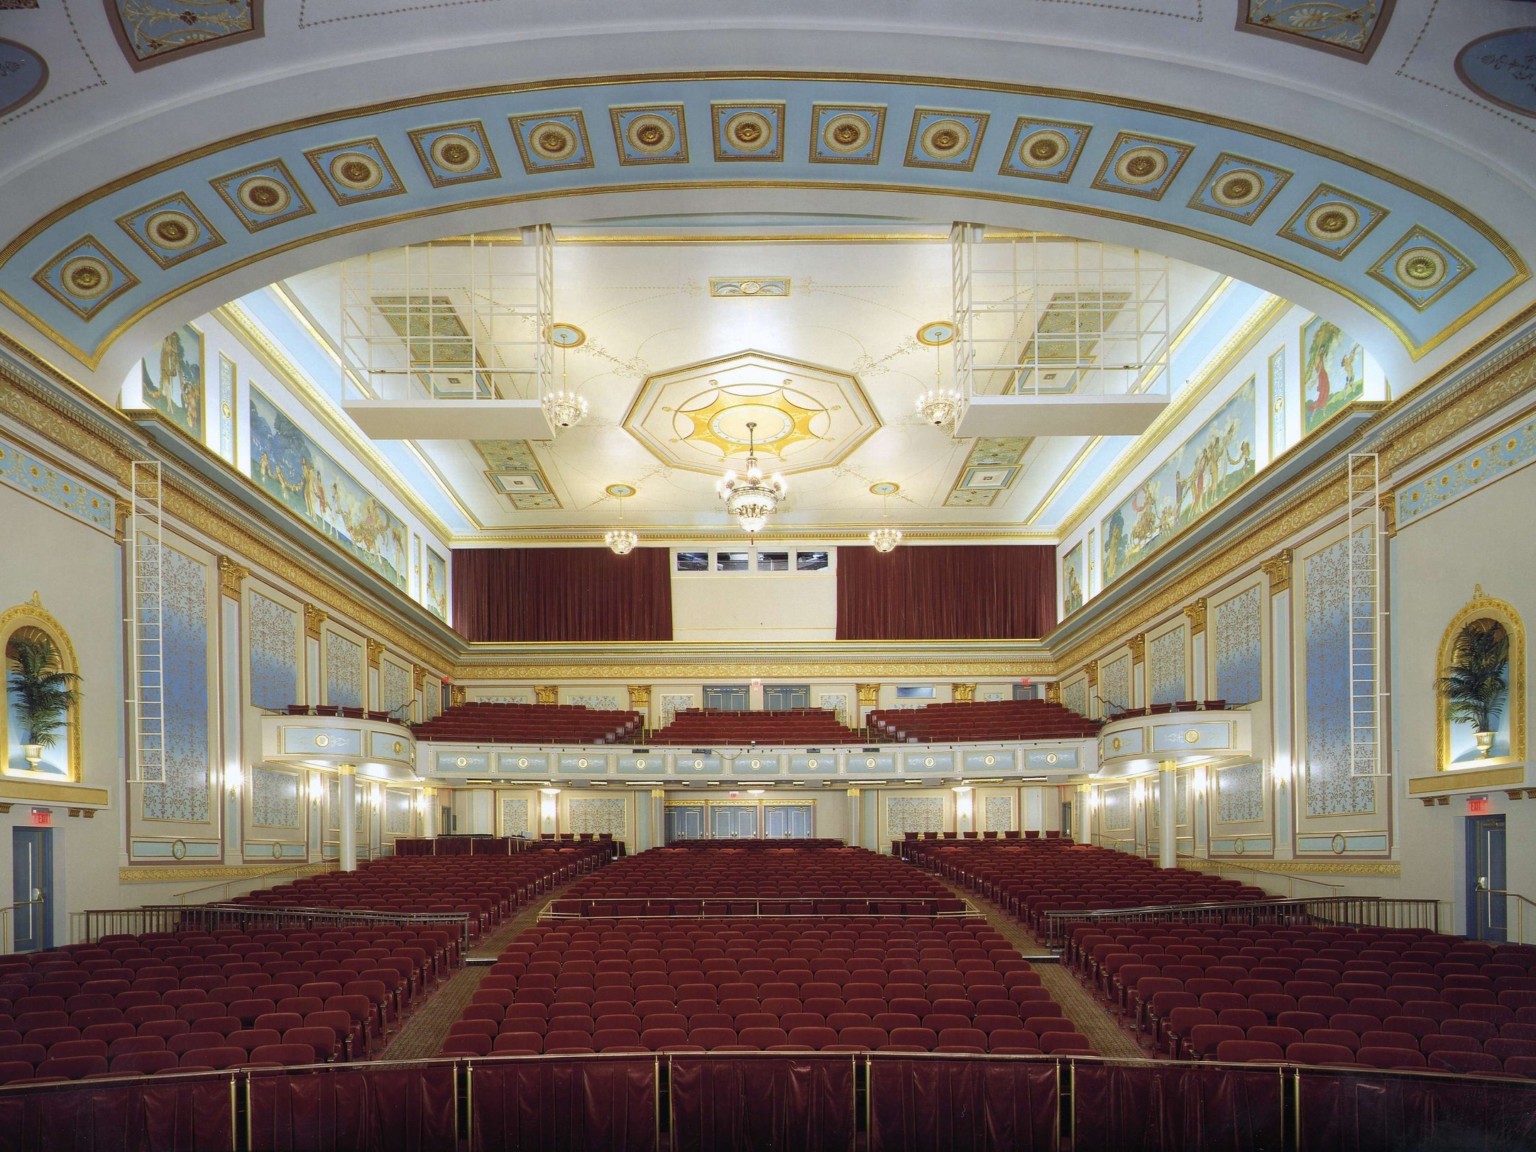 Audience gallery viewed from stage, gold accents on white walls with blue picture frame mouldings, brown seats and balcony